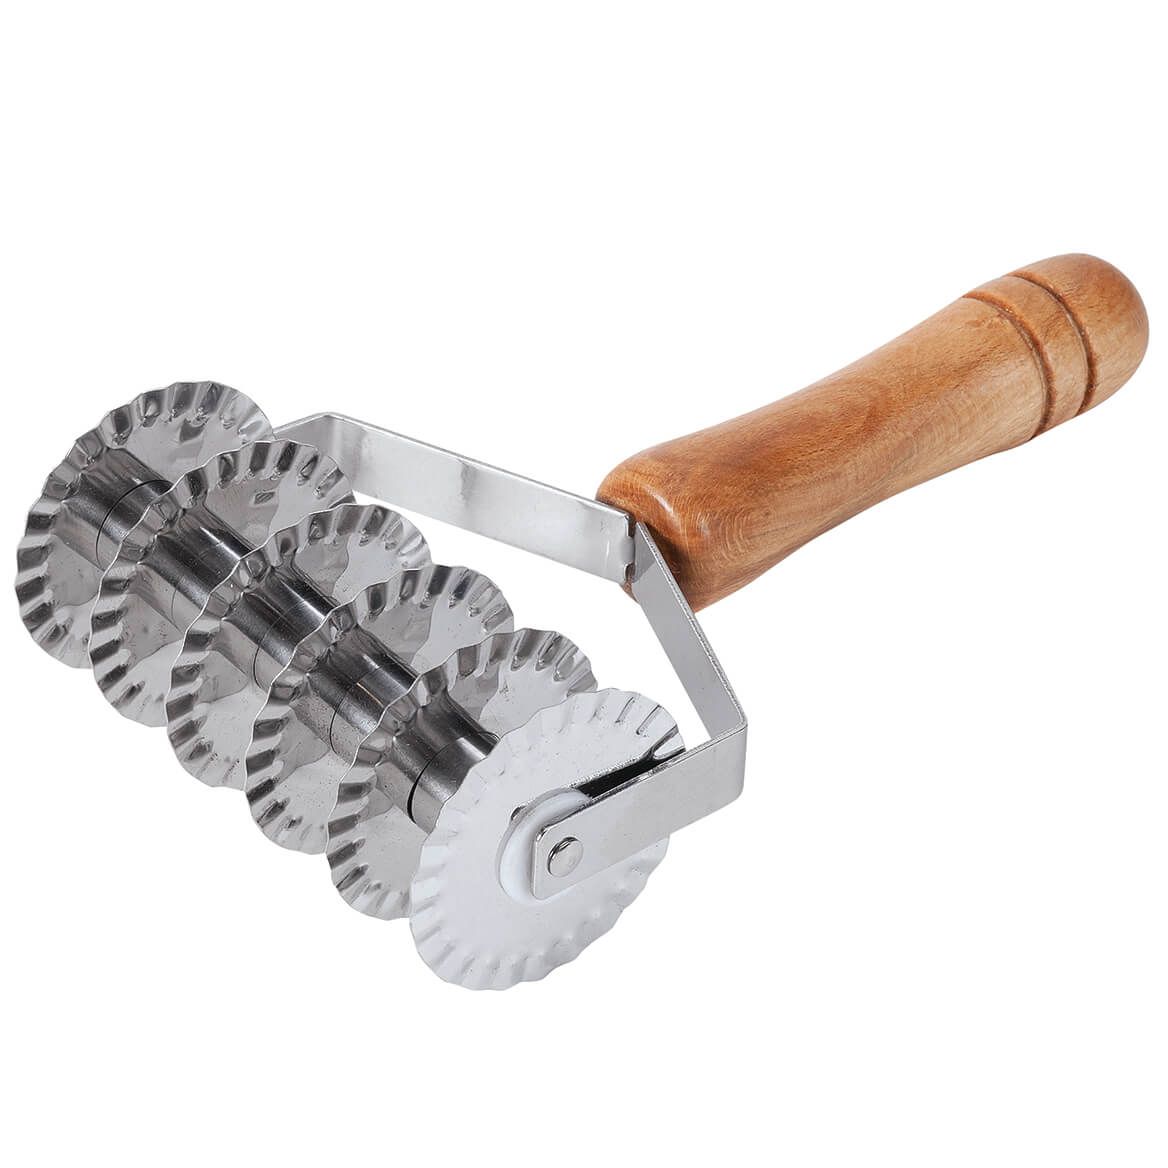 Stainless Steel Roller Cutter with Wooden Handle + '-' + 376580